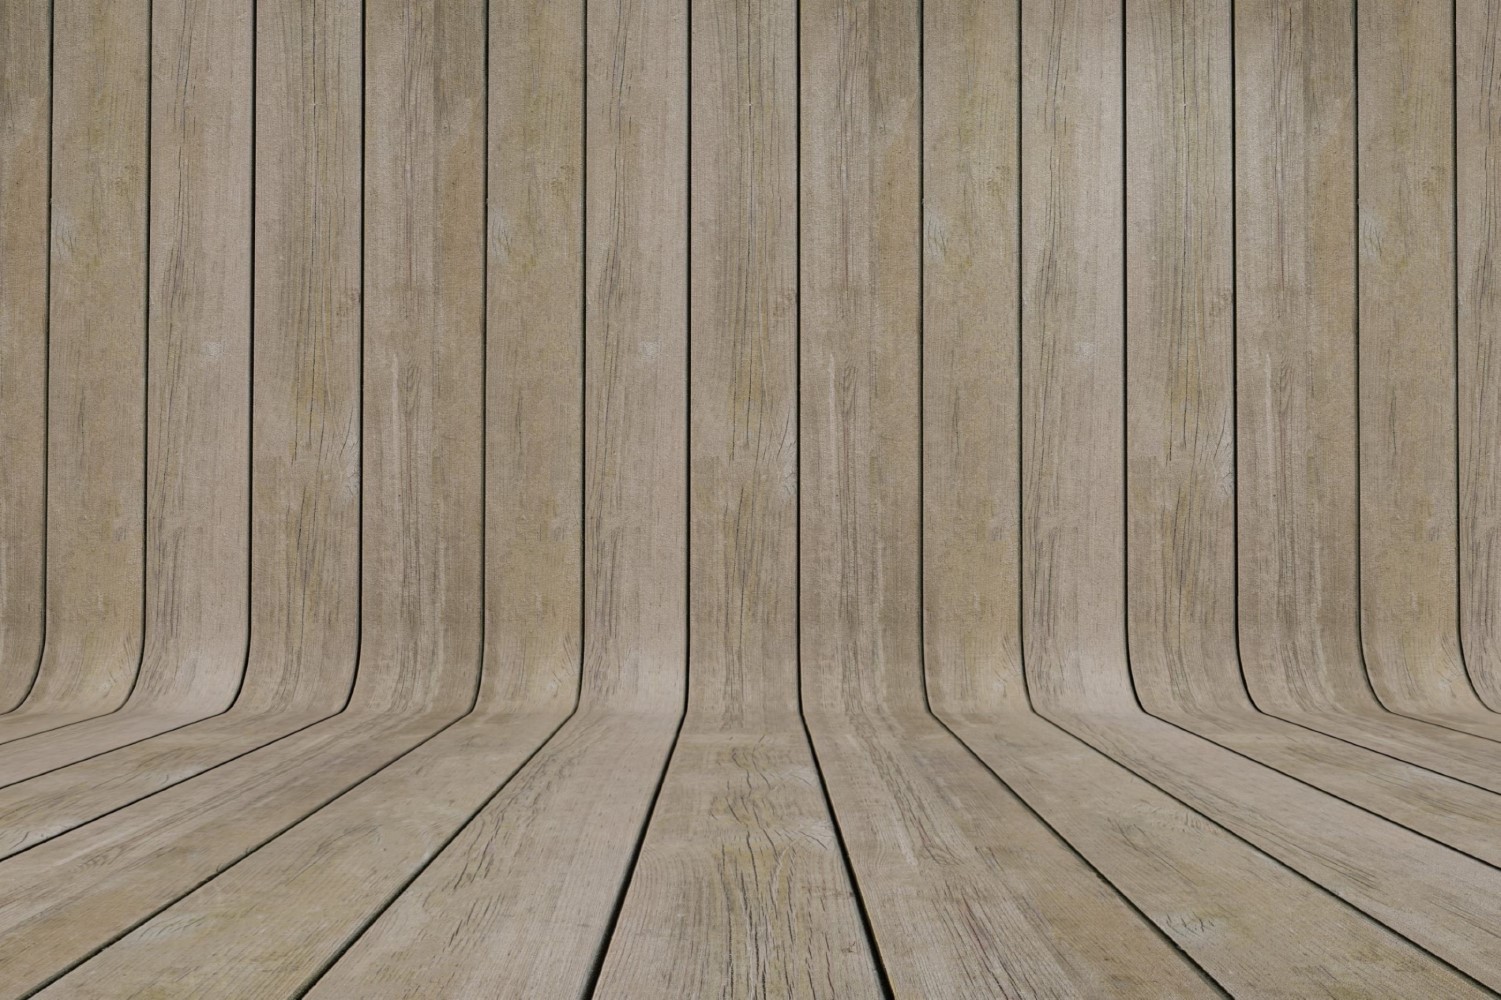 Curved Sienna Color Wood Parquet background